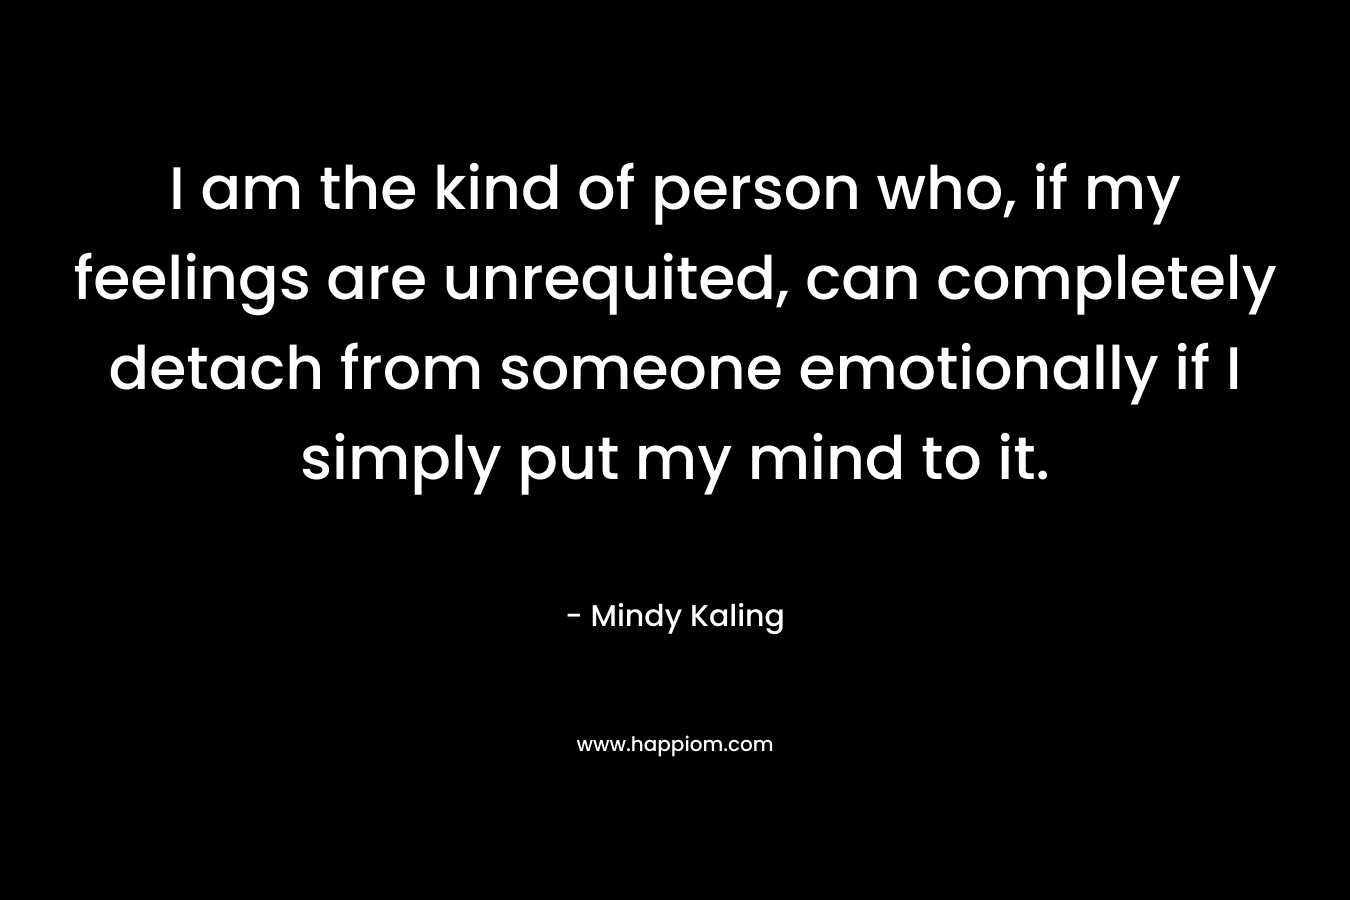 I am the kind of person who, if my feelings are unrequited, can completely detach from someone emotionally if I simply put my mind to it.